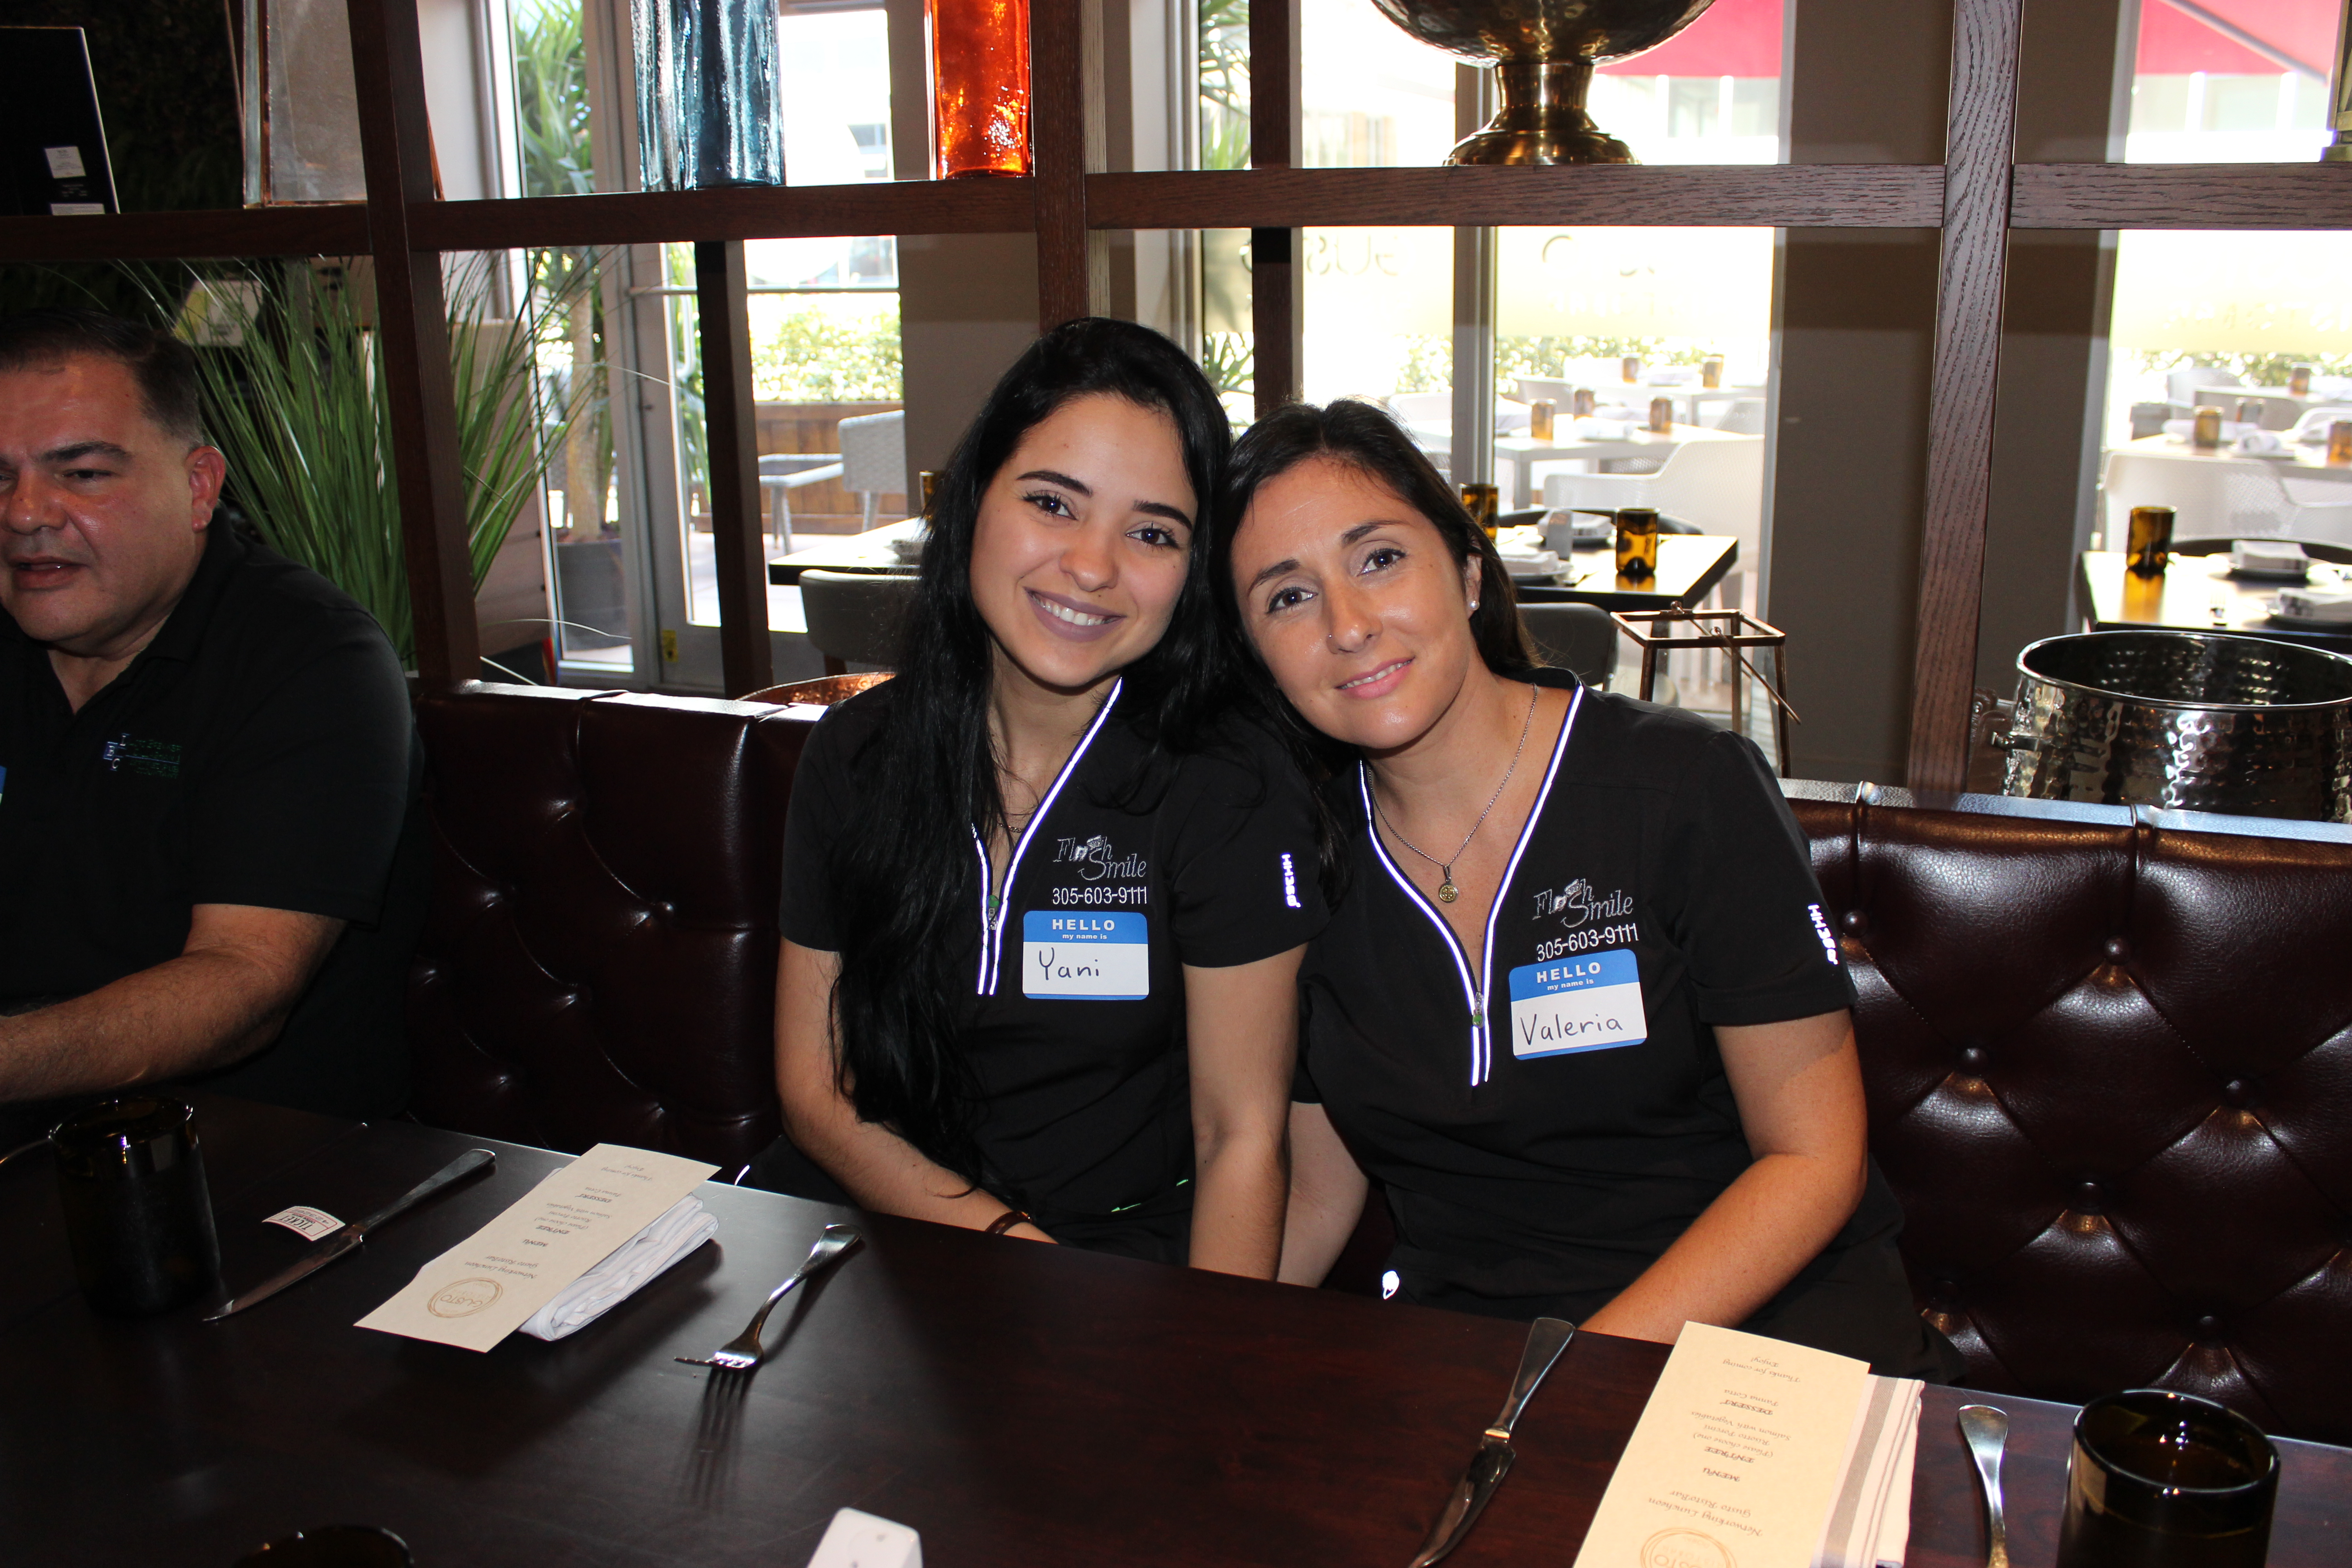 Doral Chamber of Commerce introduces Flash Smile Dental workers in Gusto Ristobar Luncheon.